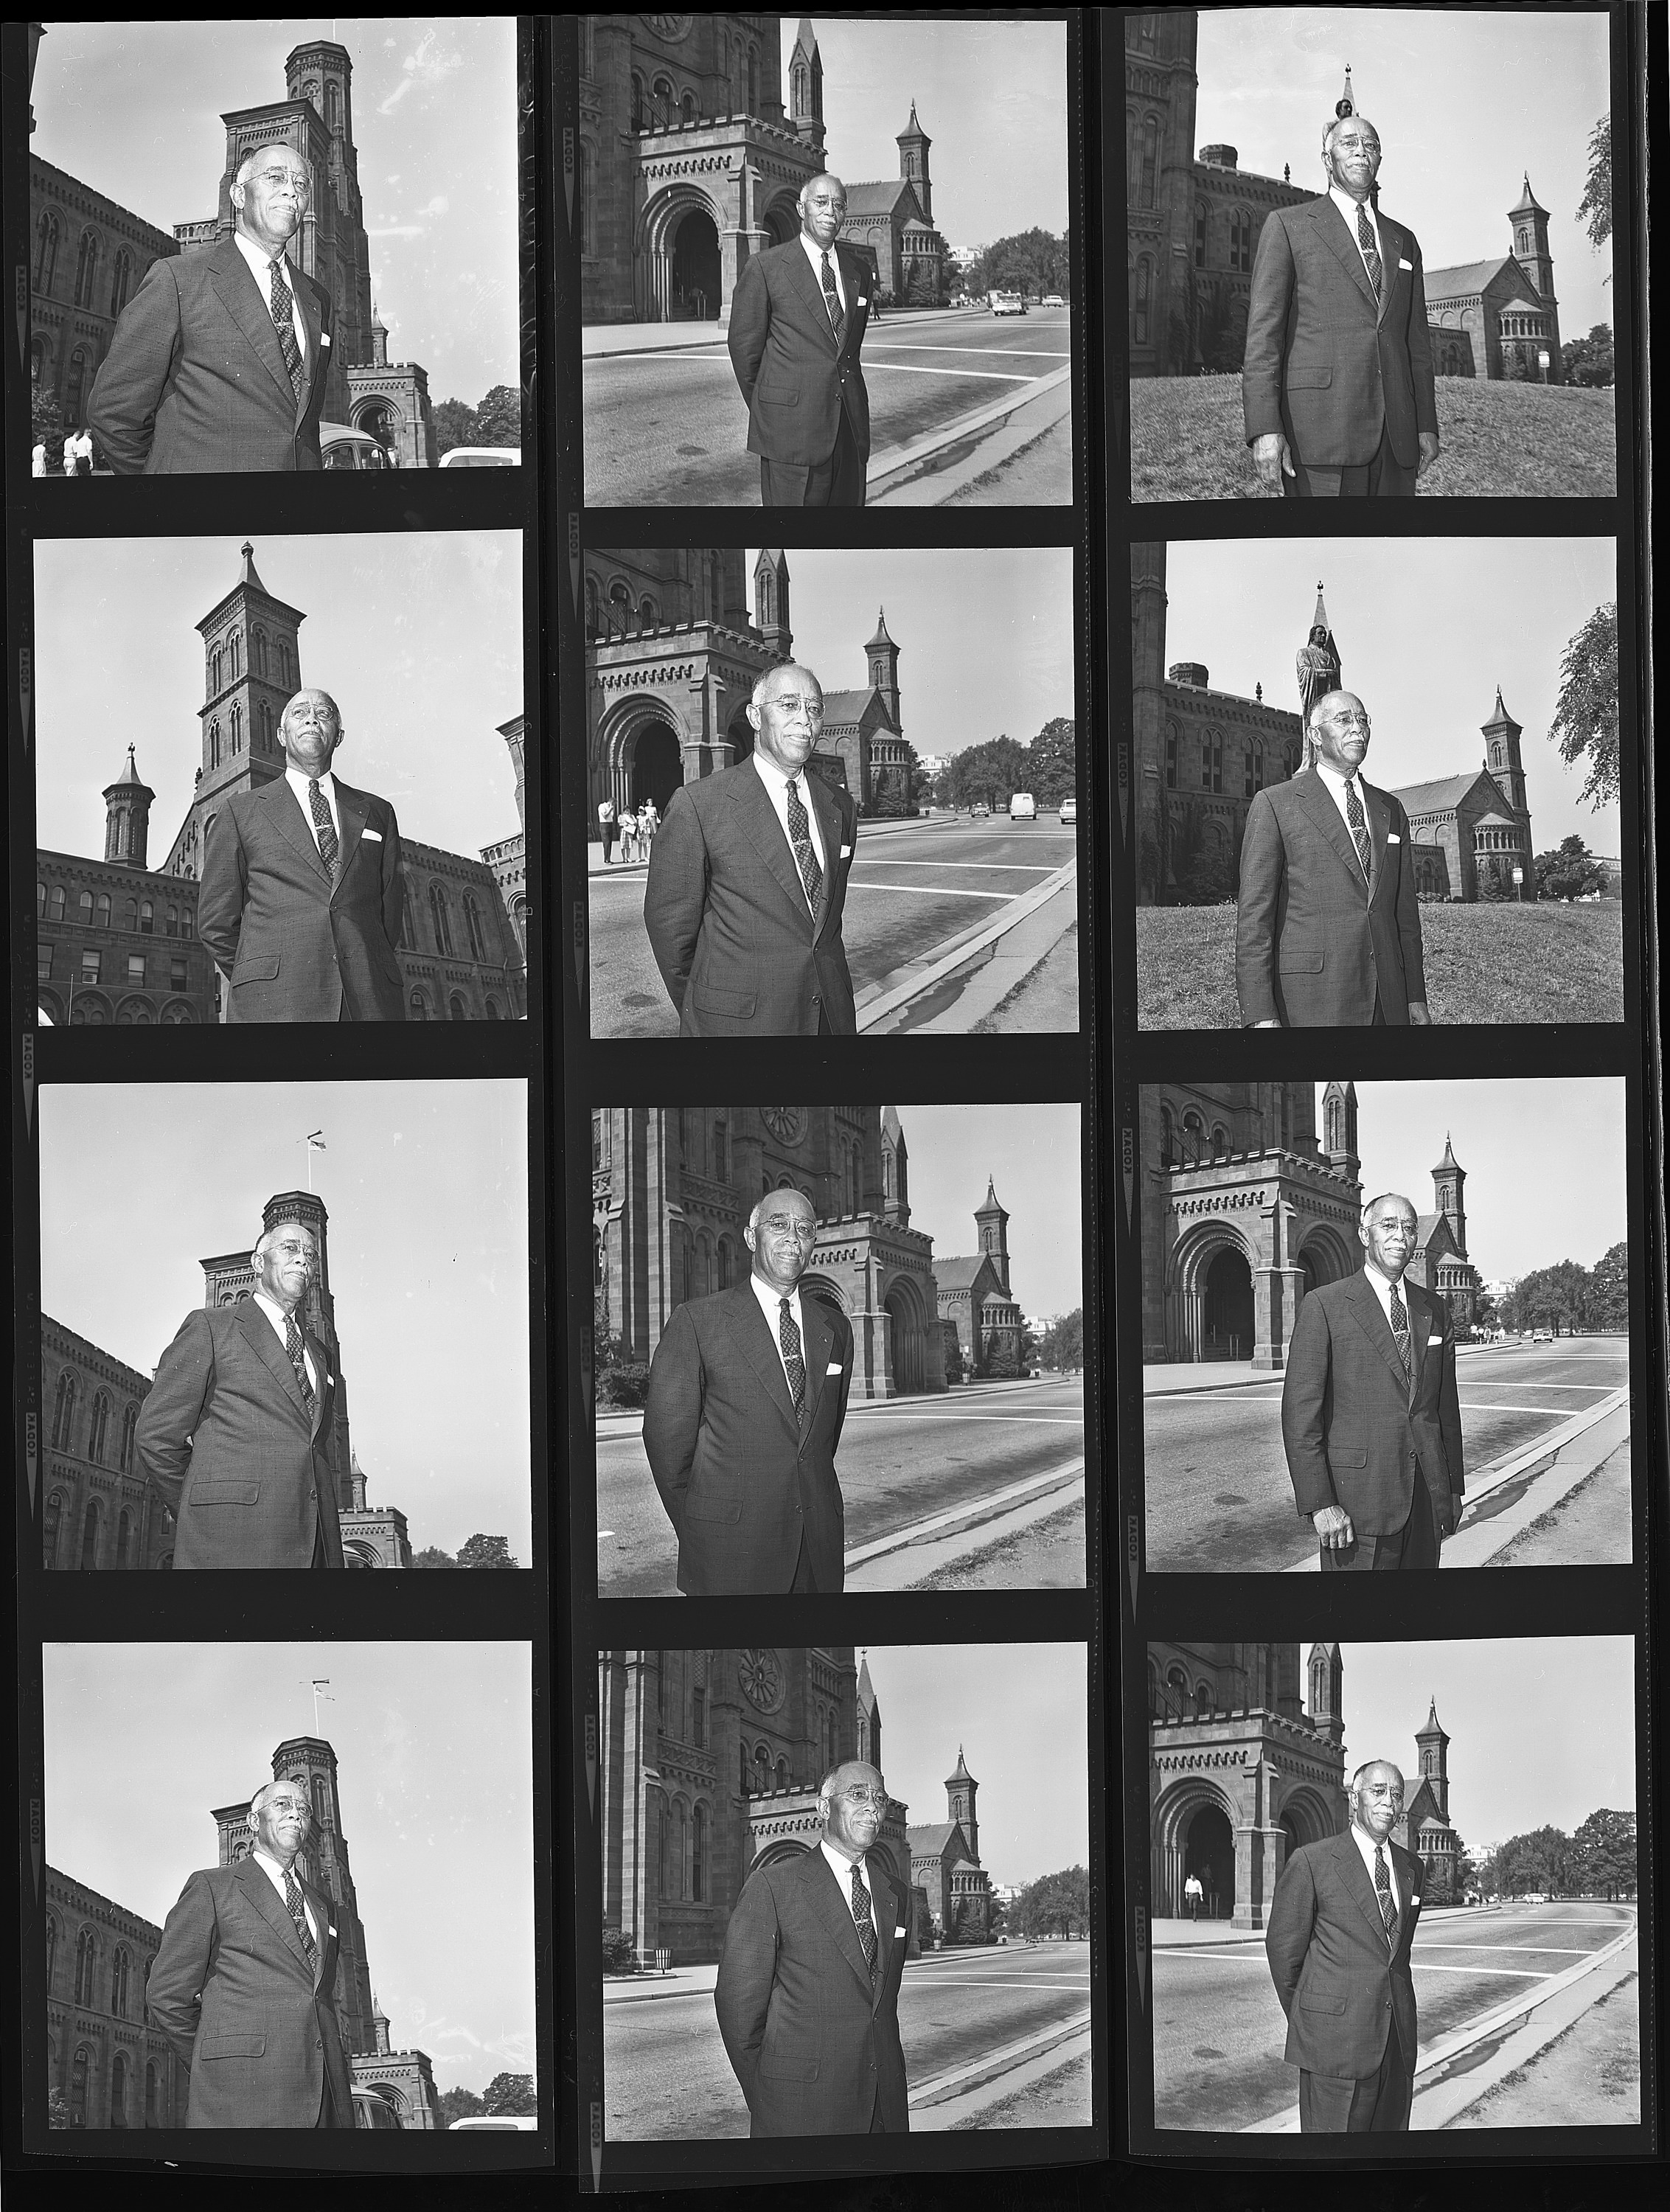 Digital contact sheet that includes 12 photographs of Jones standing in front of the Smithsonian Cas